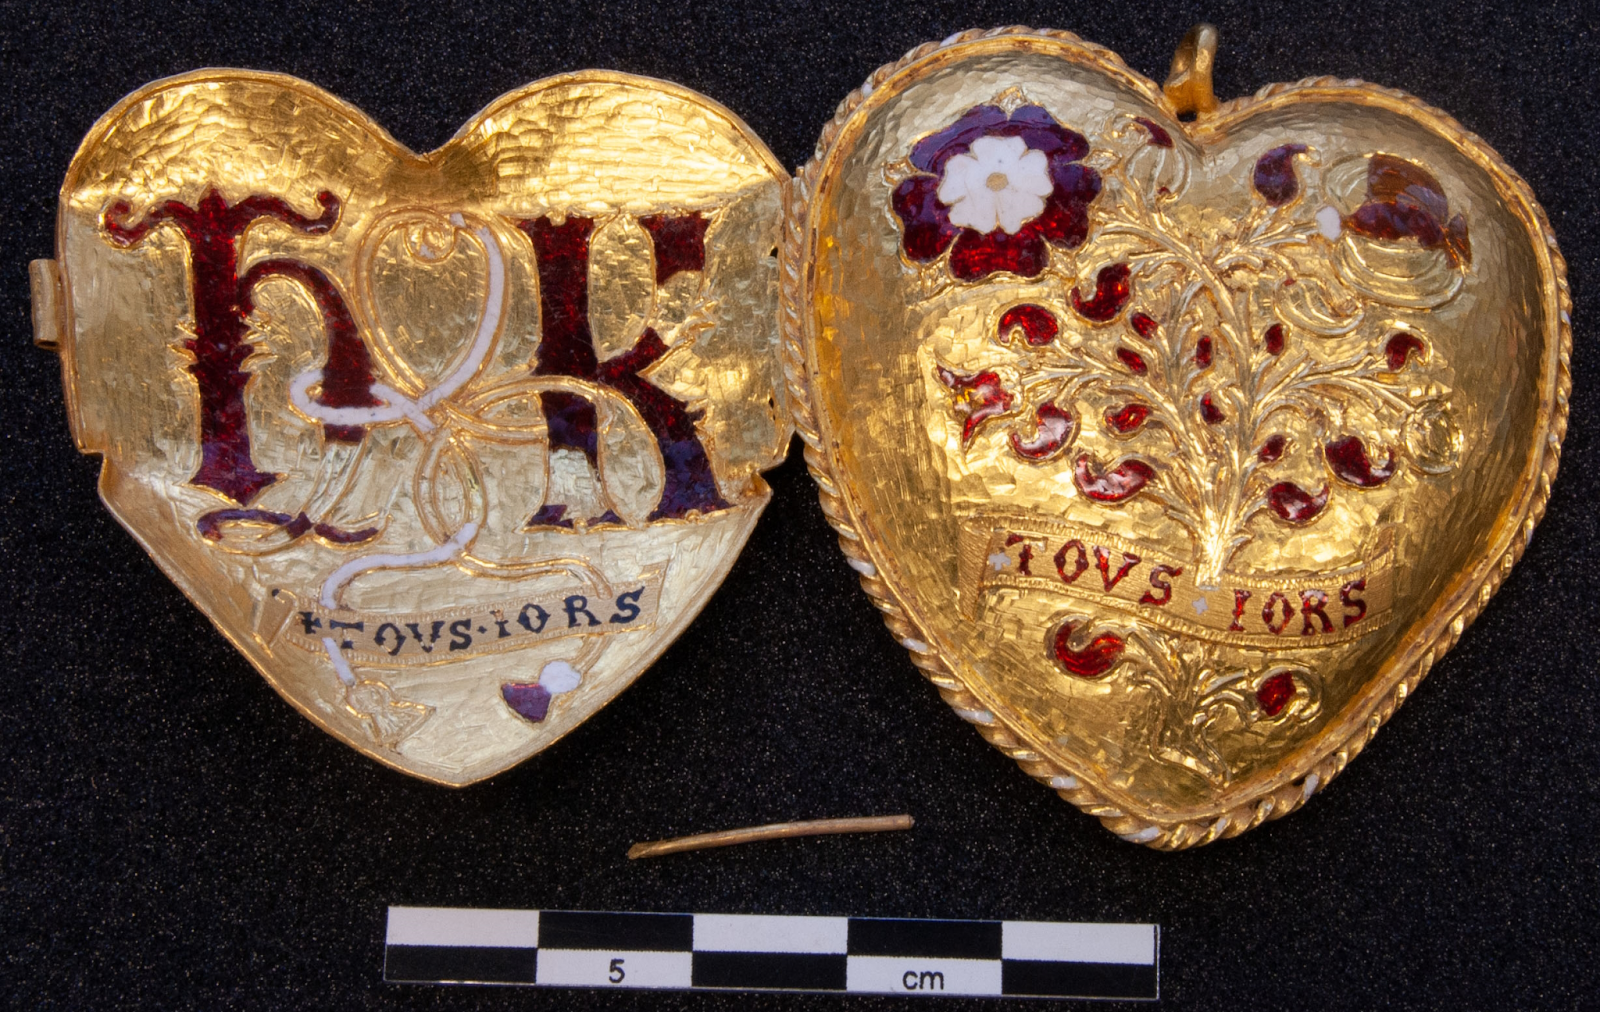 A 500-year-old Royal Pendant Was Discovered By A Novice Metal Detectorist